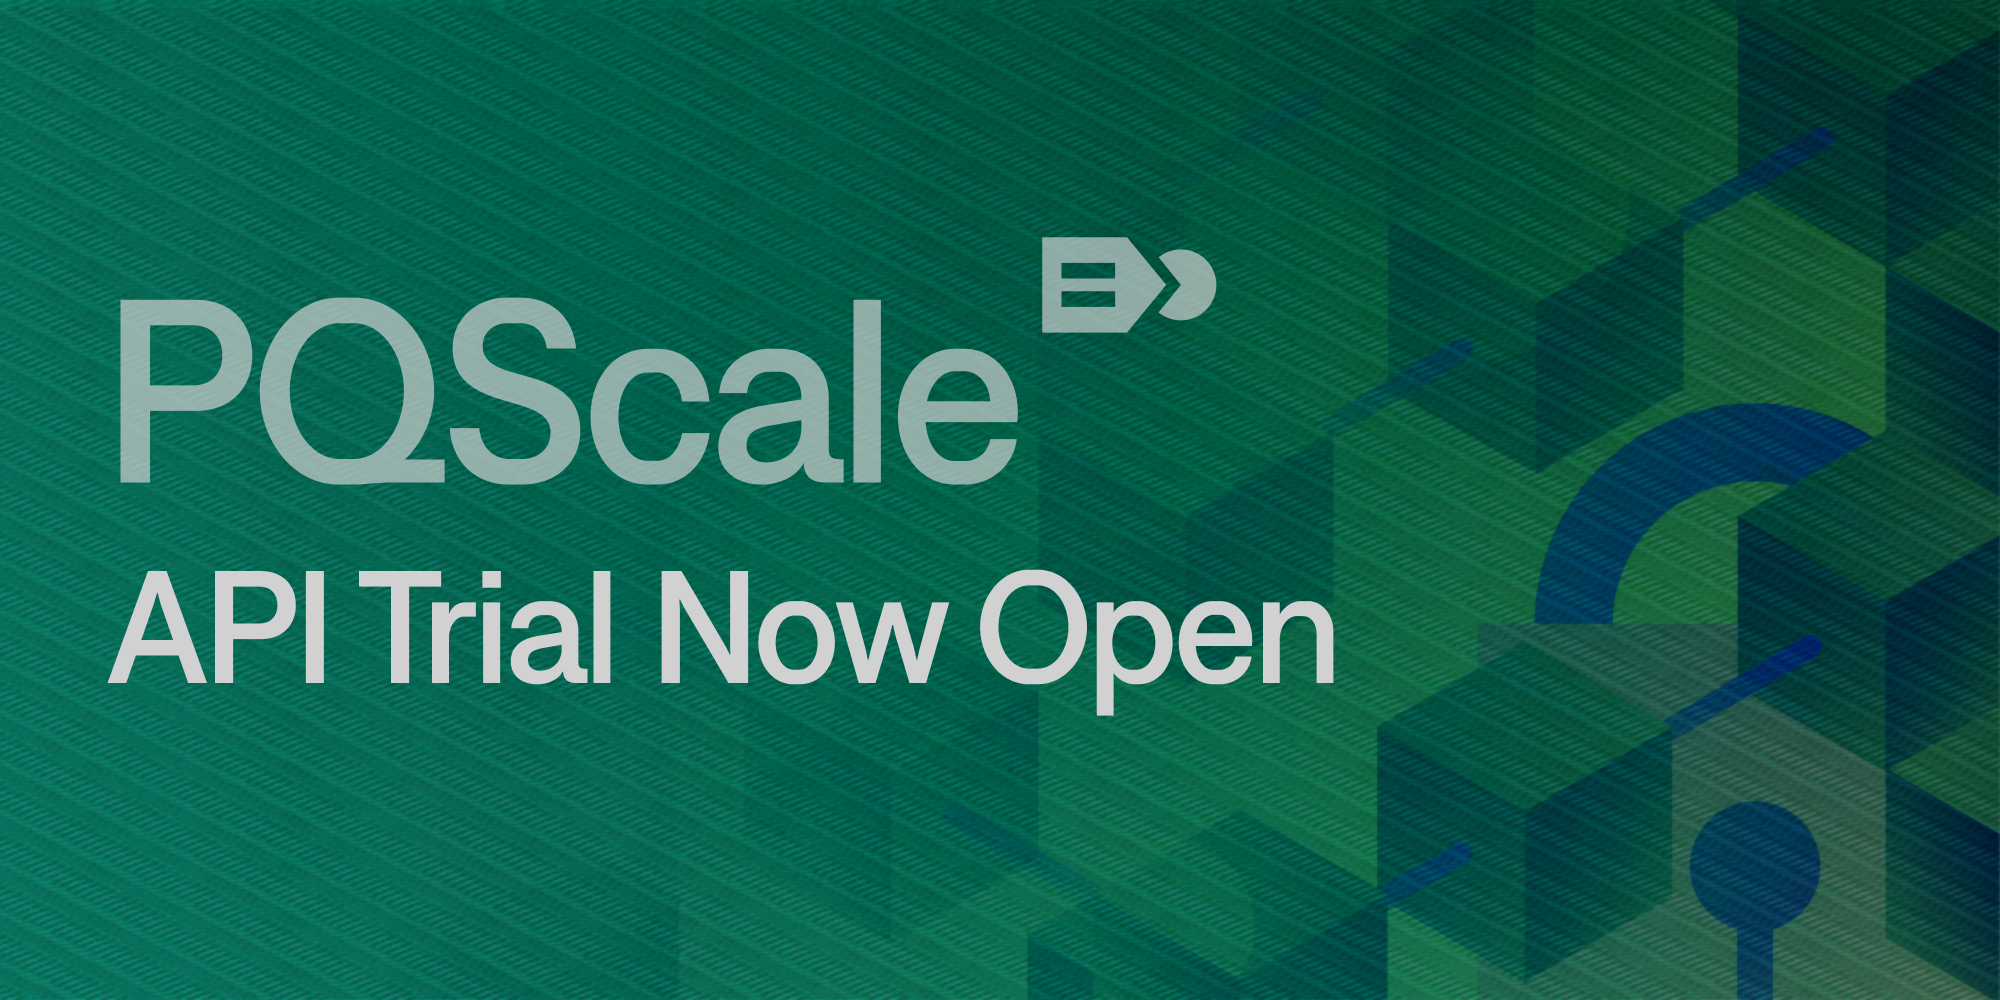 Welcome to PQScale Alpha: Trial Access to Aggregate Signature APIs Now Open